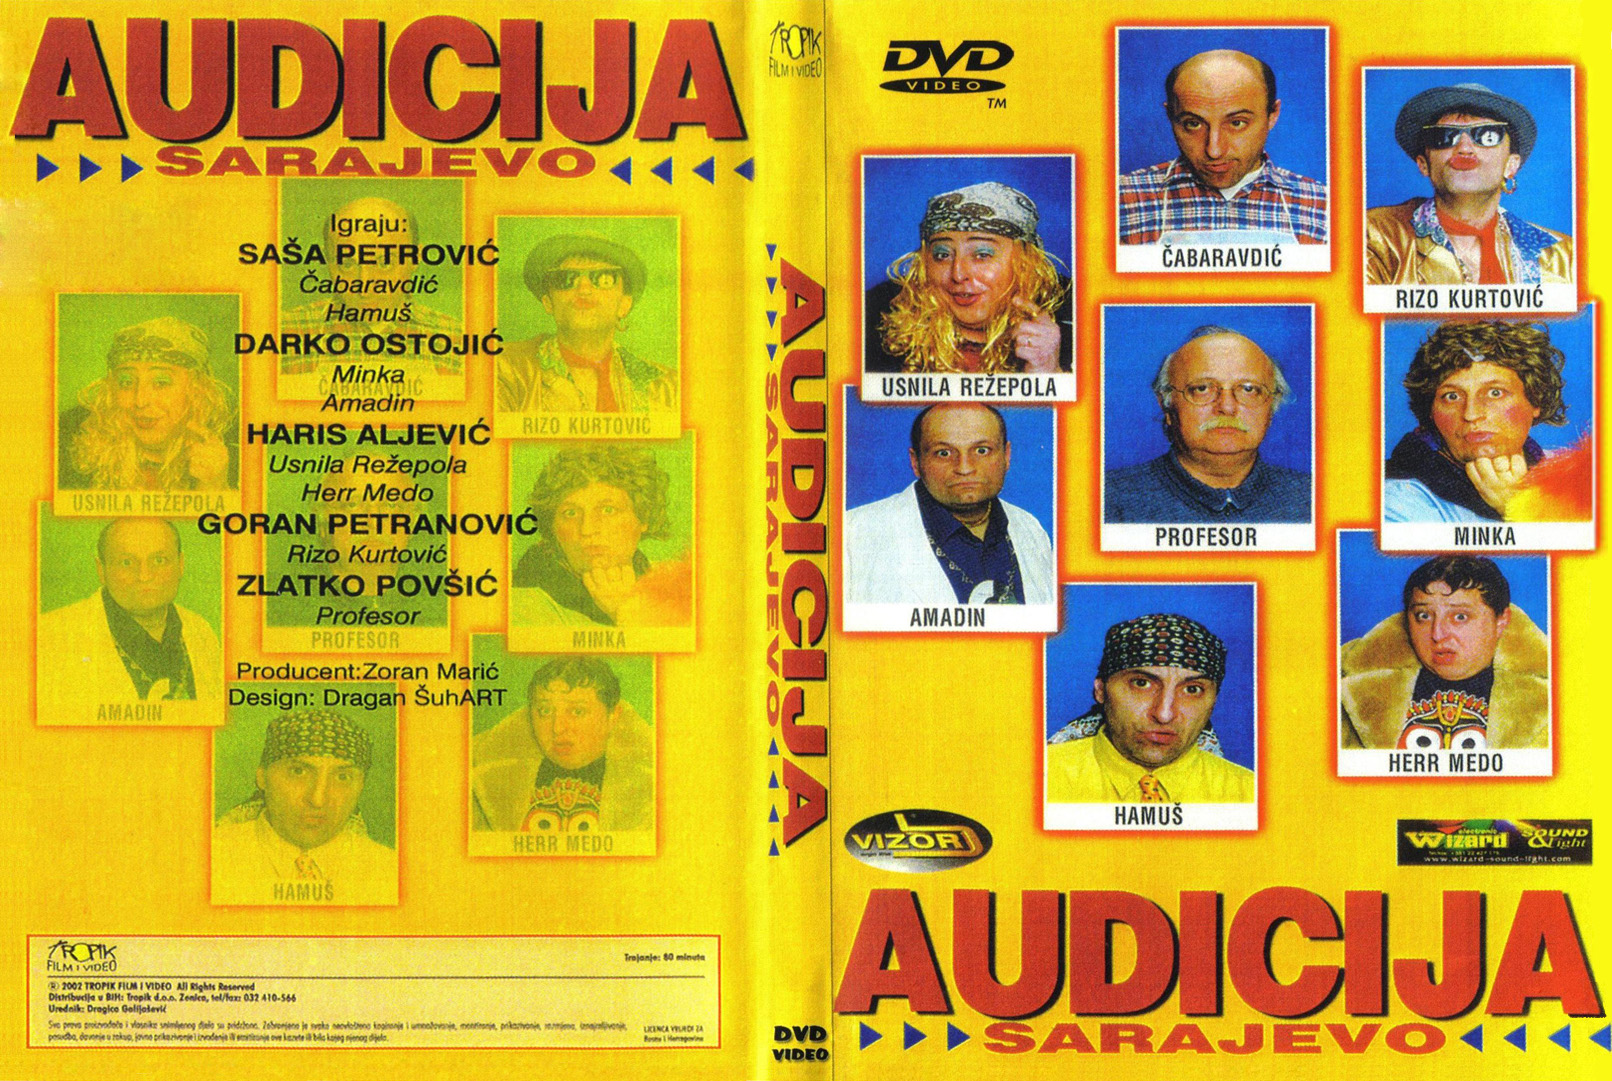 Click to view full size image -  DVD Cover - A - audicija_sarajevo_dvd - audicija_sarajevo_dvd.jpg